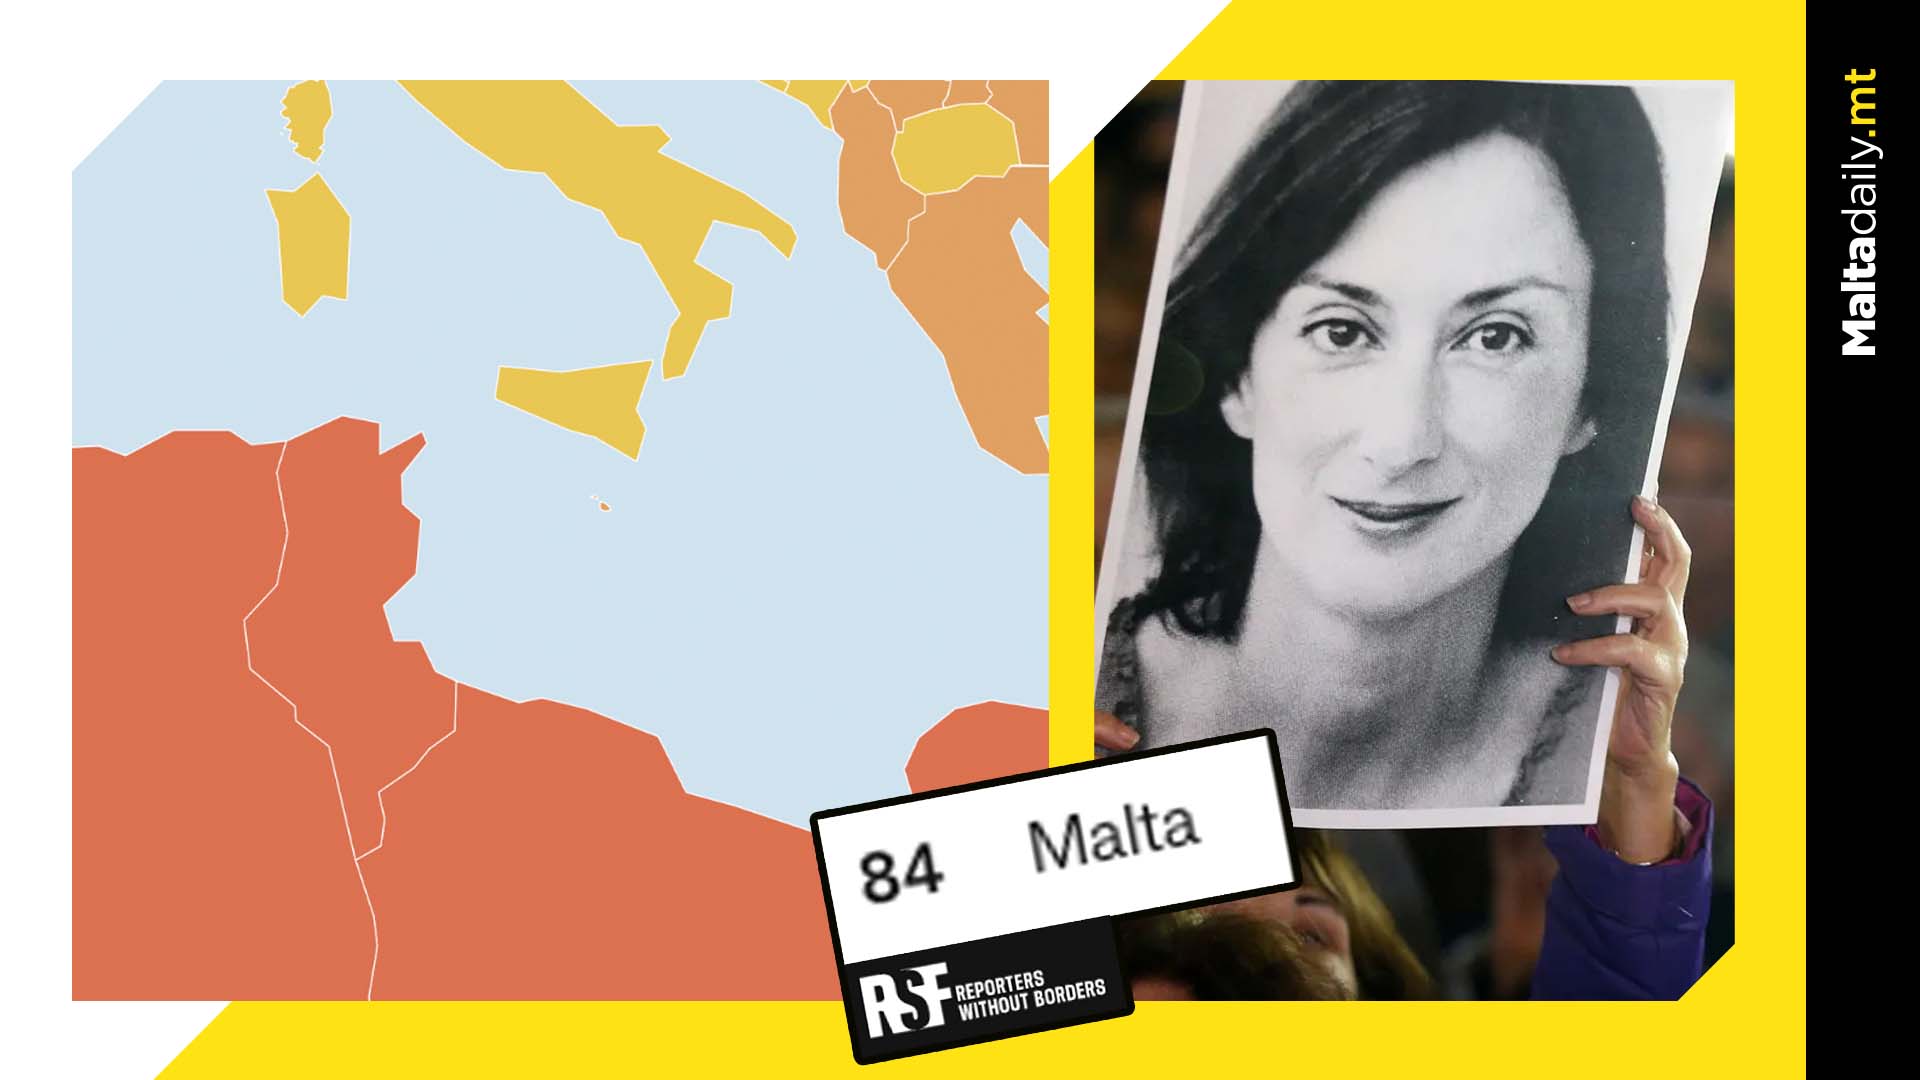 Malta drops to 84th place in World Press Freedom Index